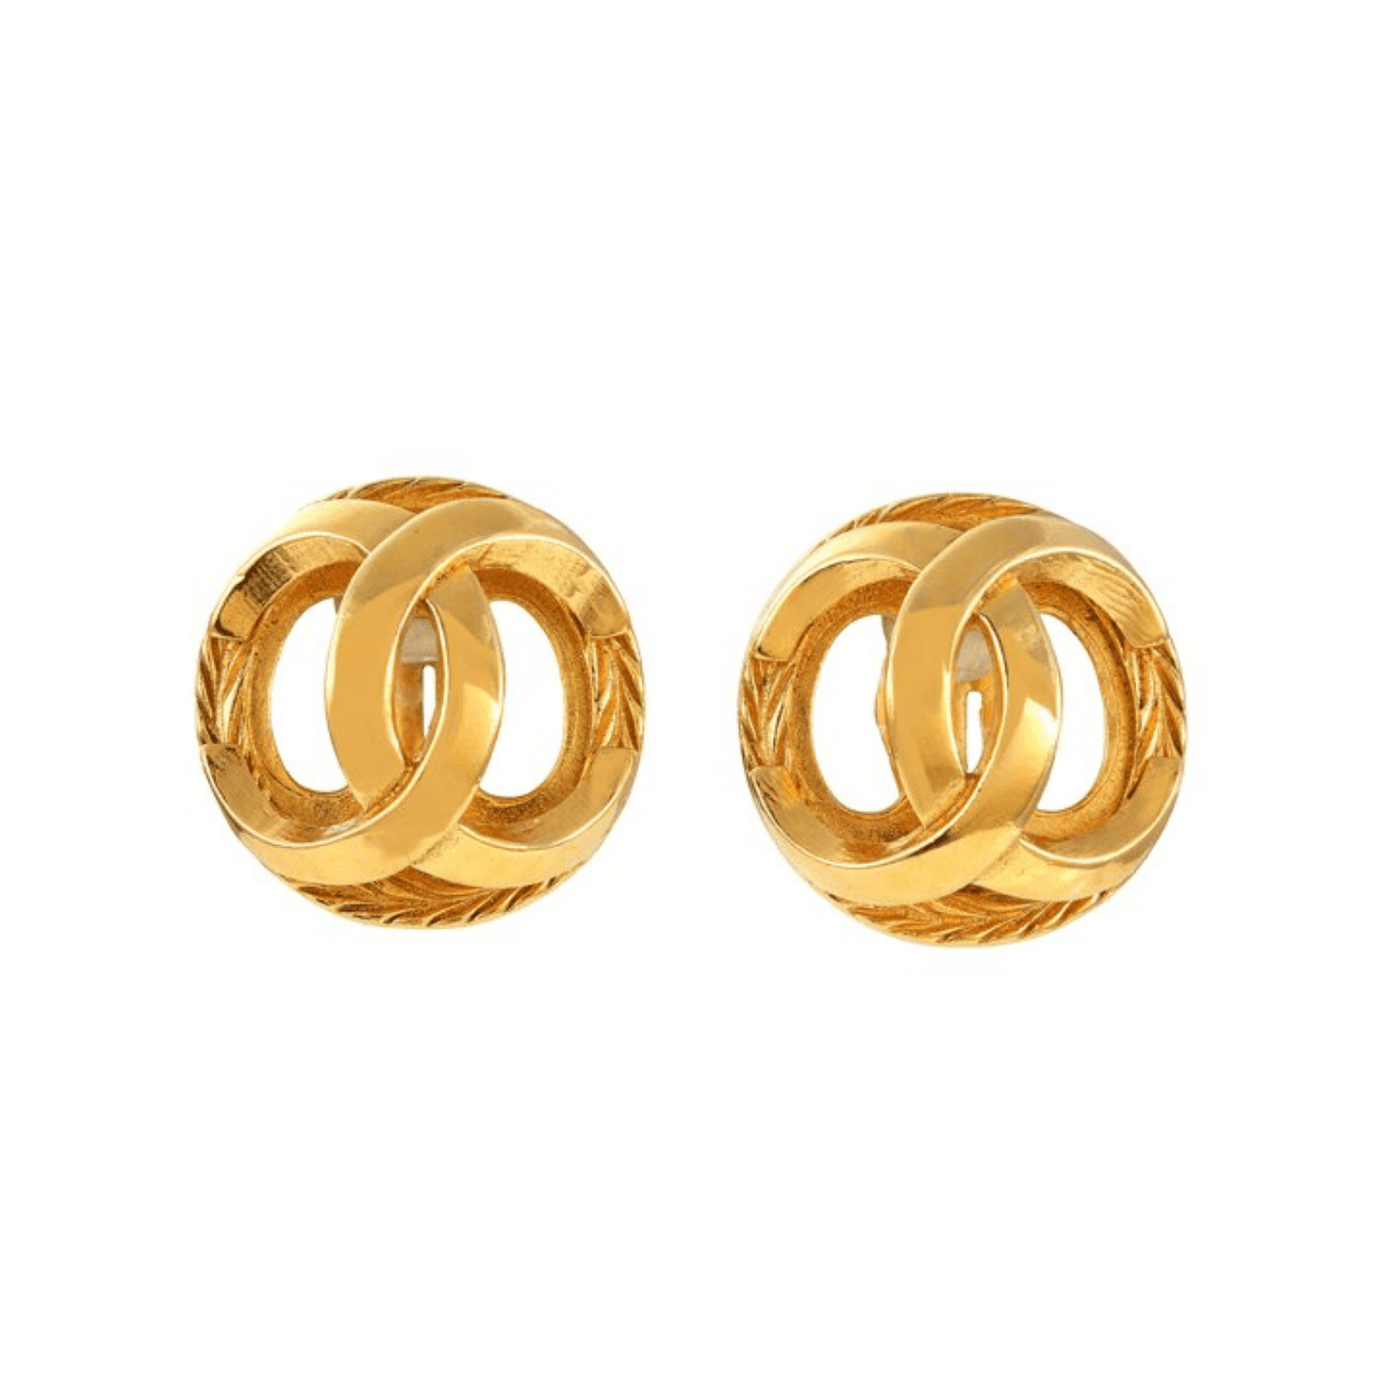 Chanel Gold Interlocking CC Cage Earrings - Only Authentics